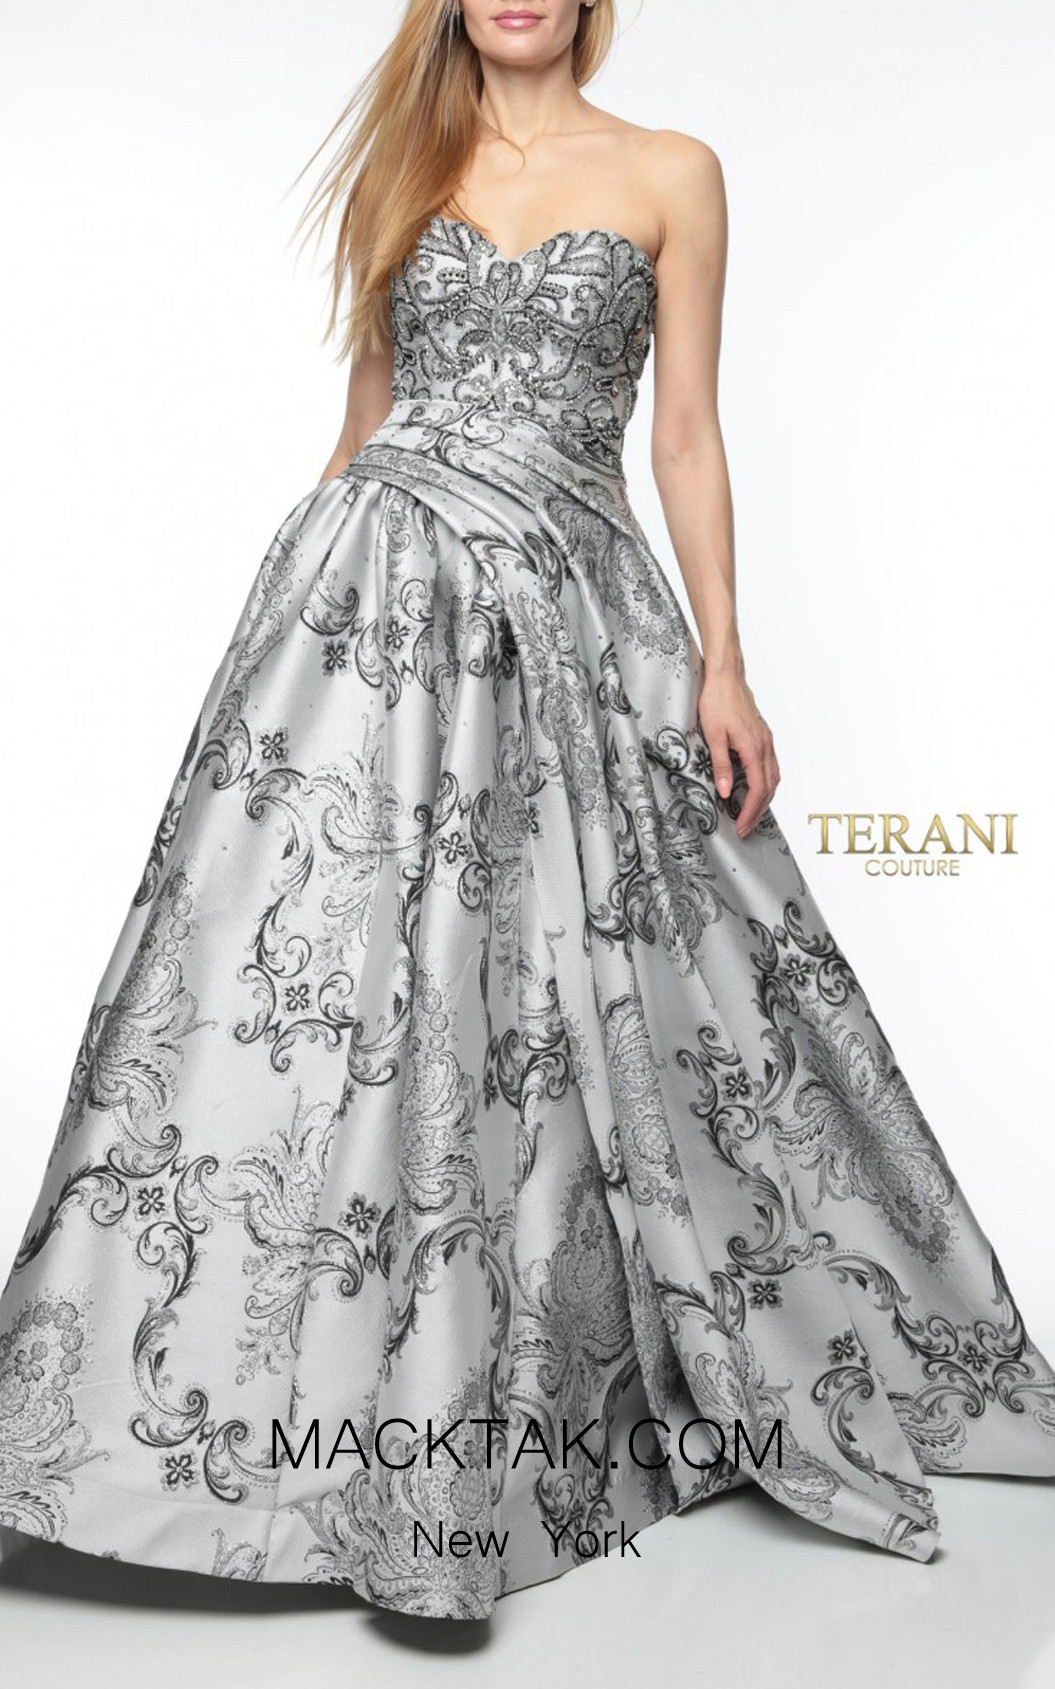 Terani Couture 1921M0501 Front Dress